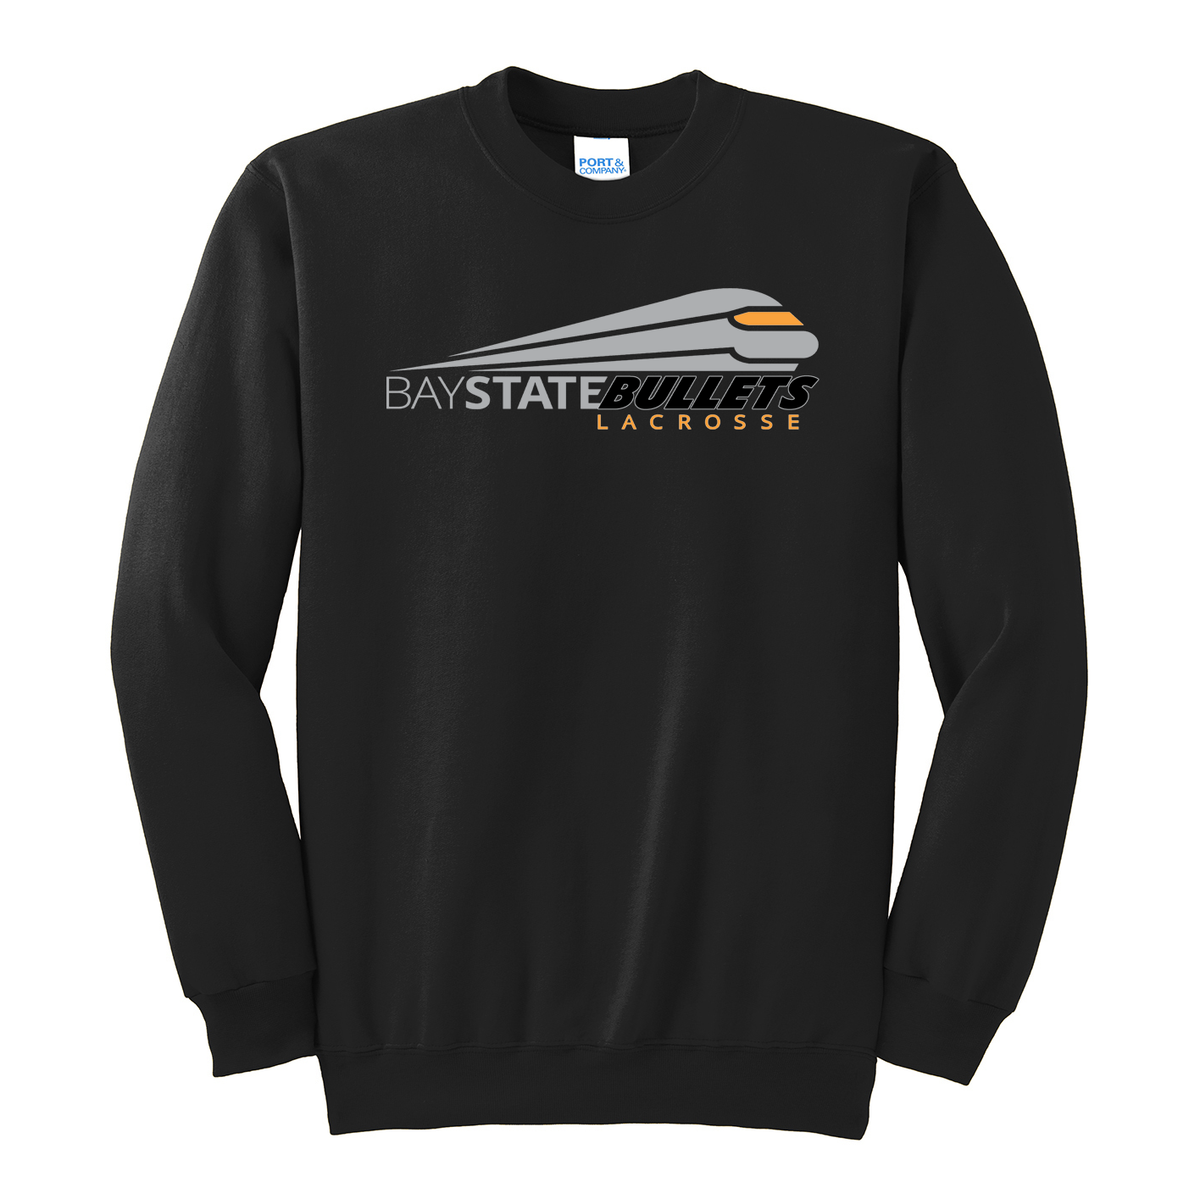 Bay State Bullets Crew Neck Sweater